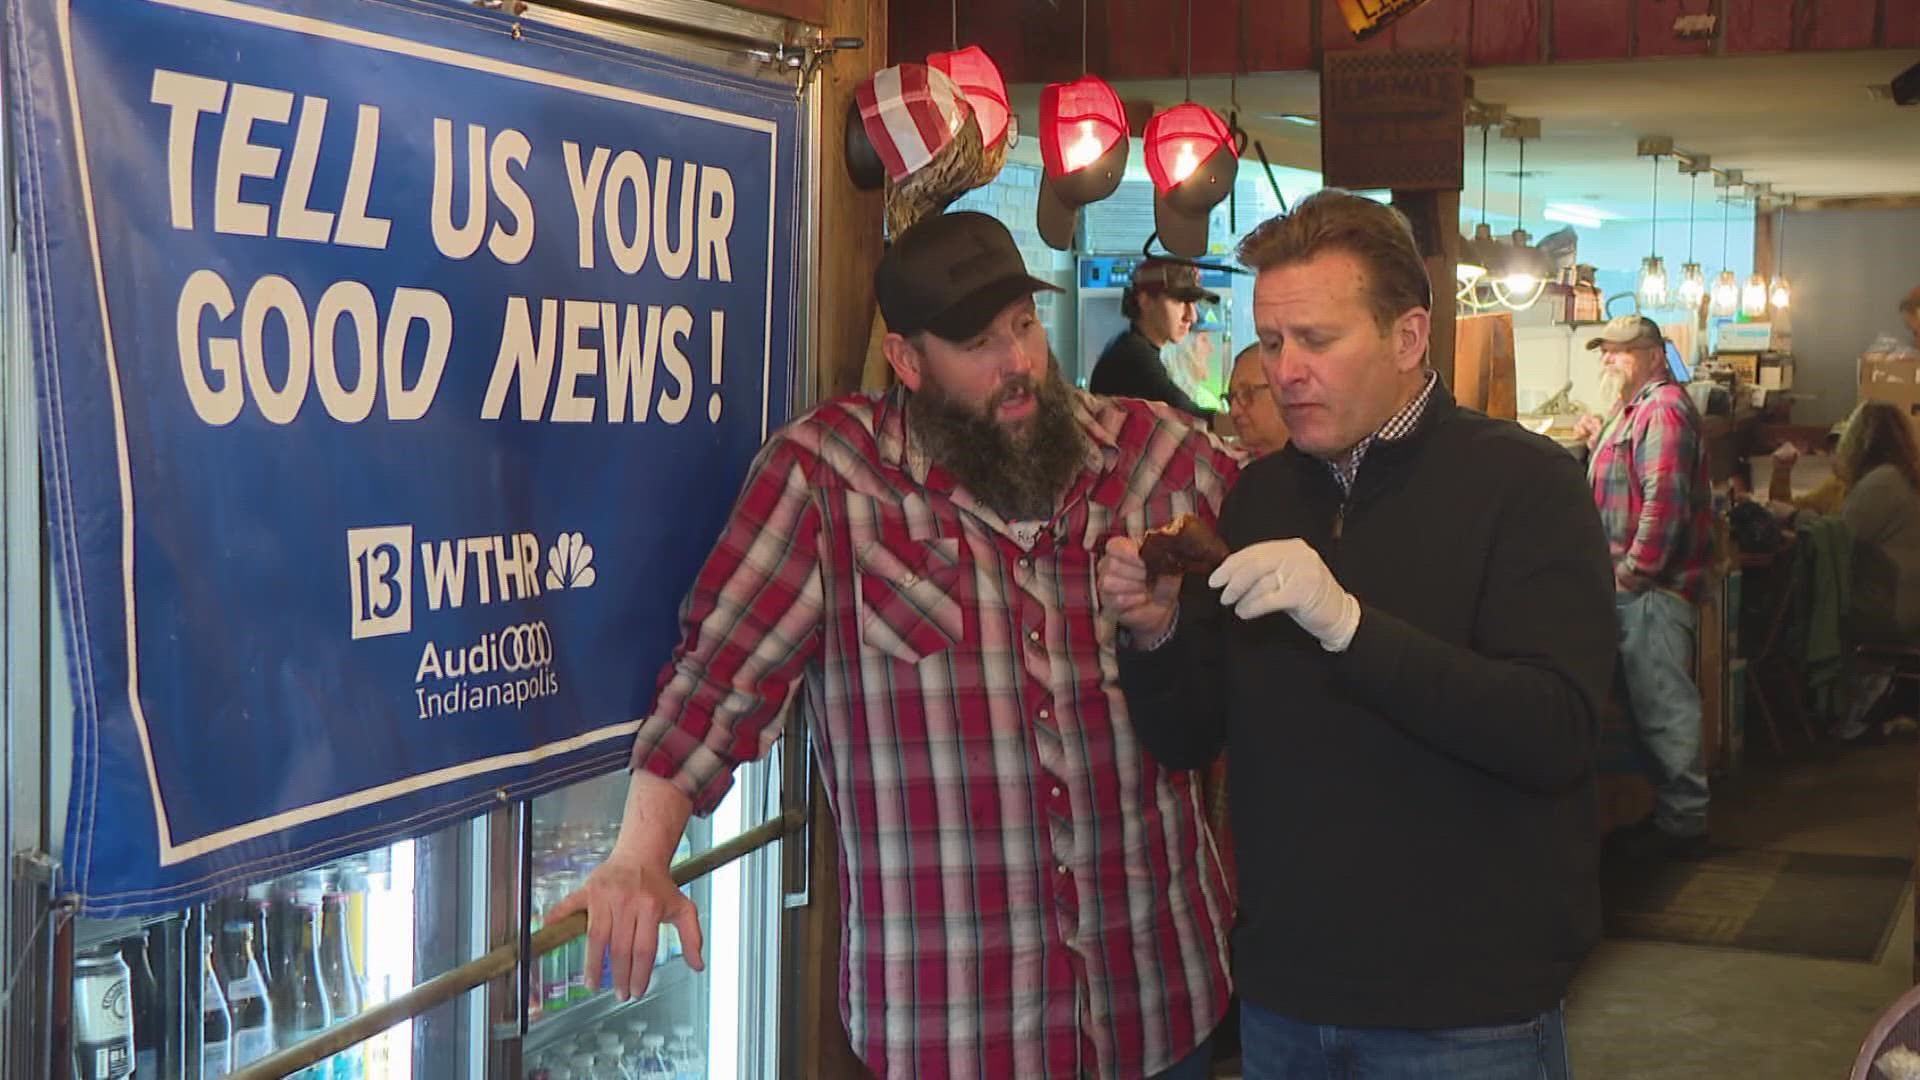 Dave Calabro hung out in Lizton today to get some good news!